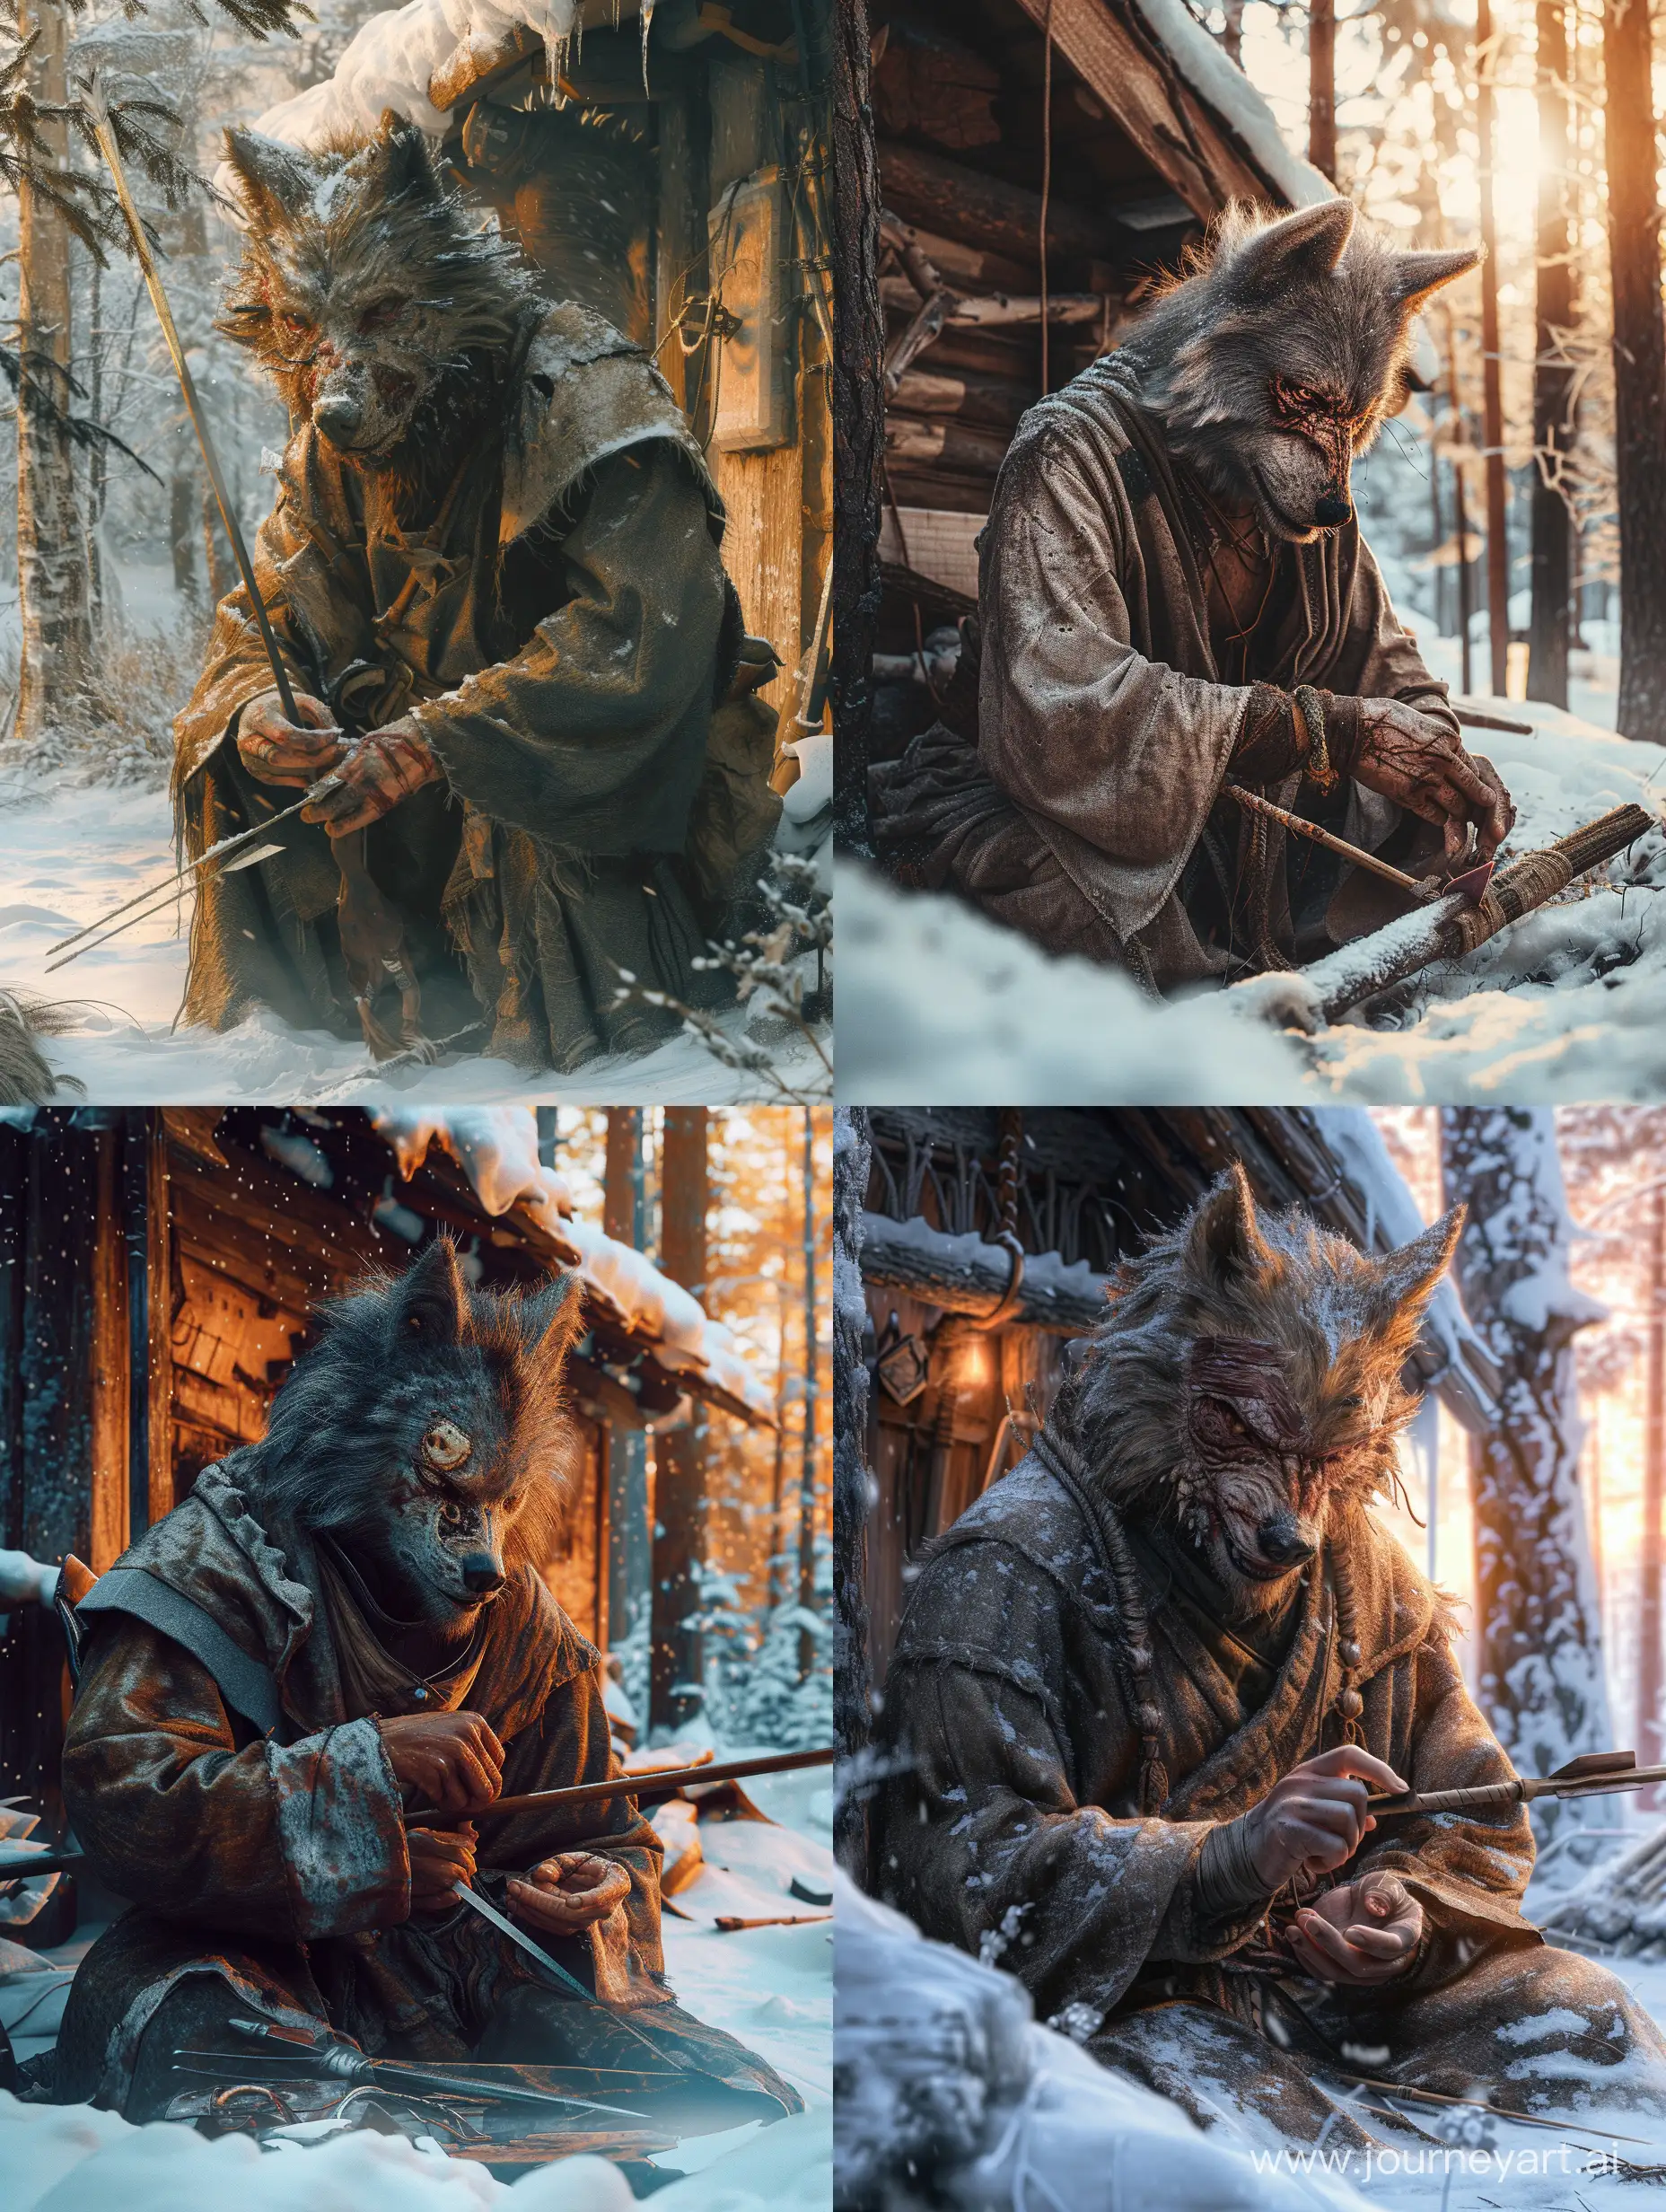 Solitary-Wolf-Warrior-Crafting-Spear-in-Snowy-Forest